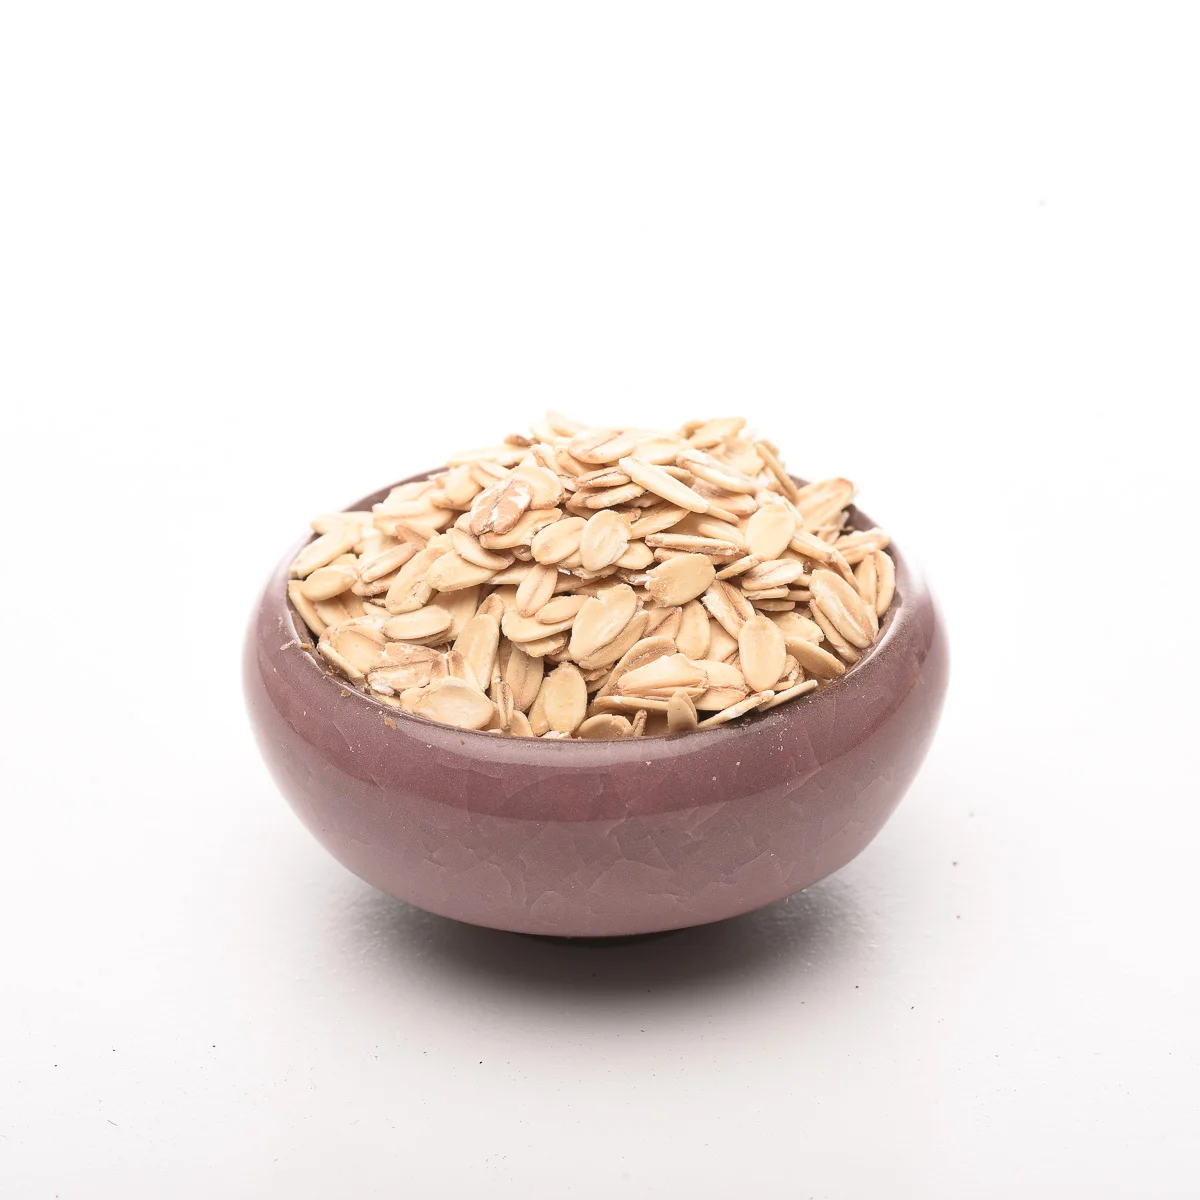 Wholesale High Quality Rolled Oats Listing Limited Time Offer Cheap Organic Oats Kernels Oat Flakes 500g Carton Box Cereal for A